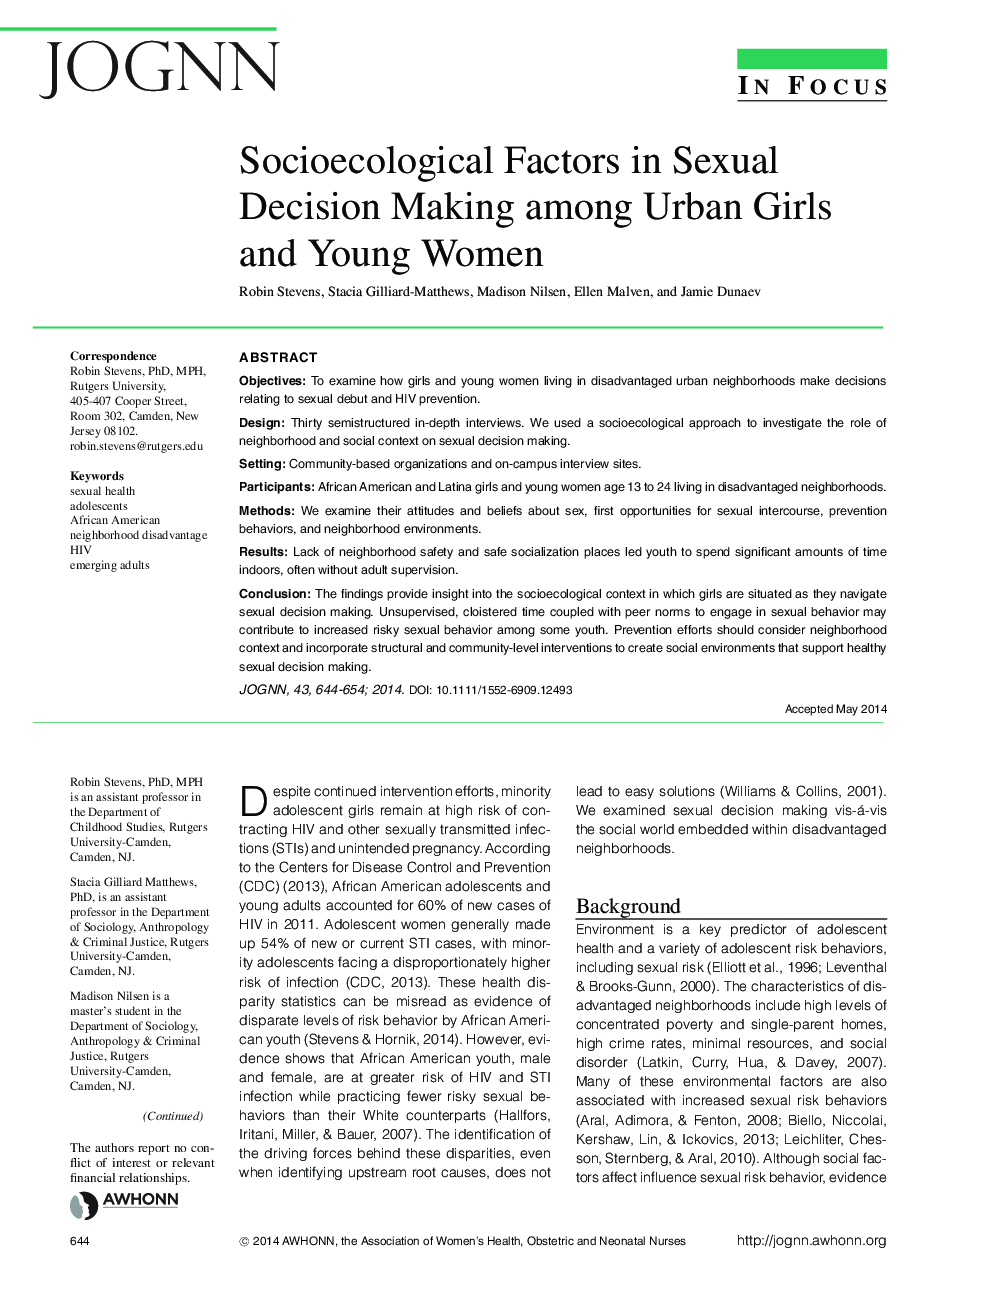 Socioecological Factors in Sexual Decision Making among Urban Girls and Young Women